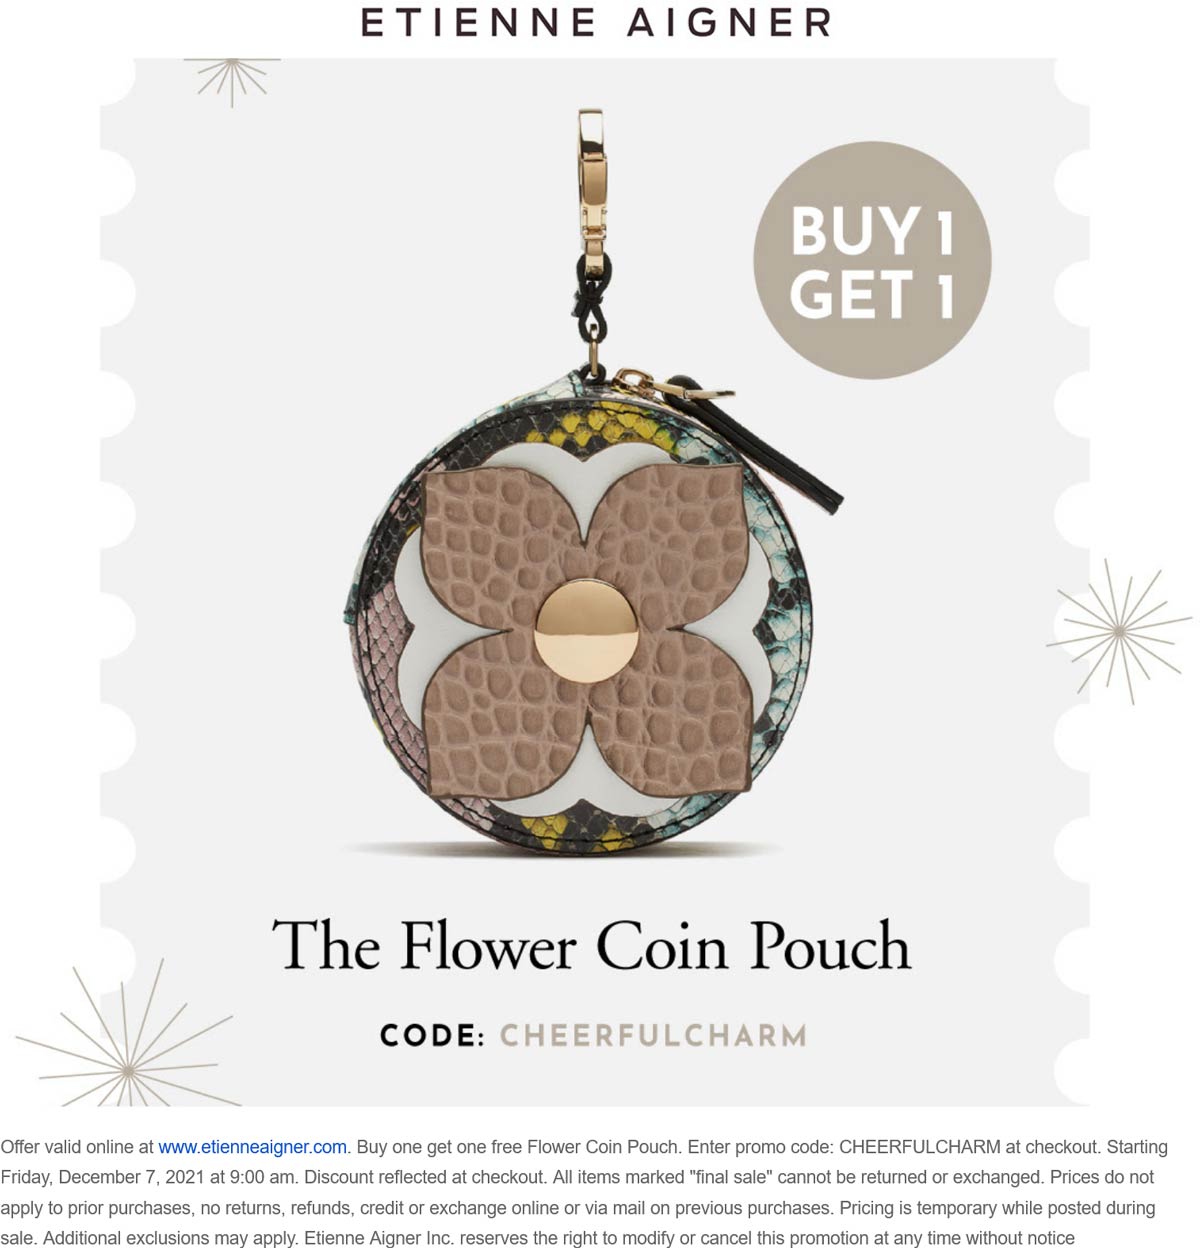 Etienne Aigner stores Coupon  Second flower coin pouch free at Etienne Aigner via promo code CHEERFULCHARM #etienneaigner 